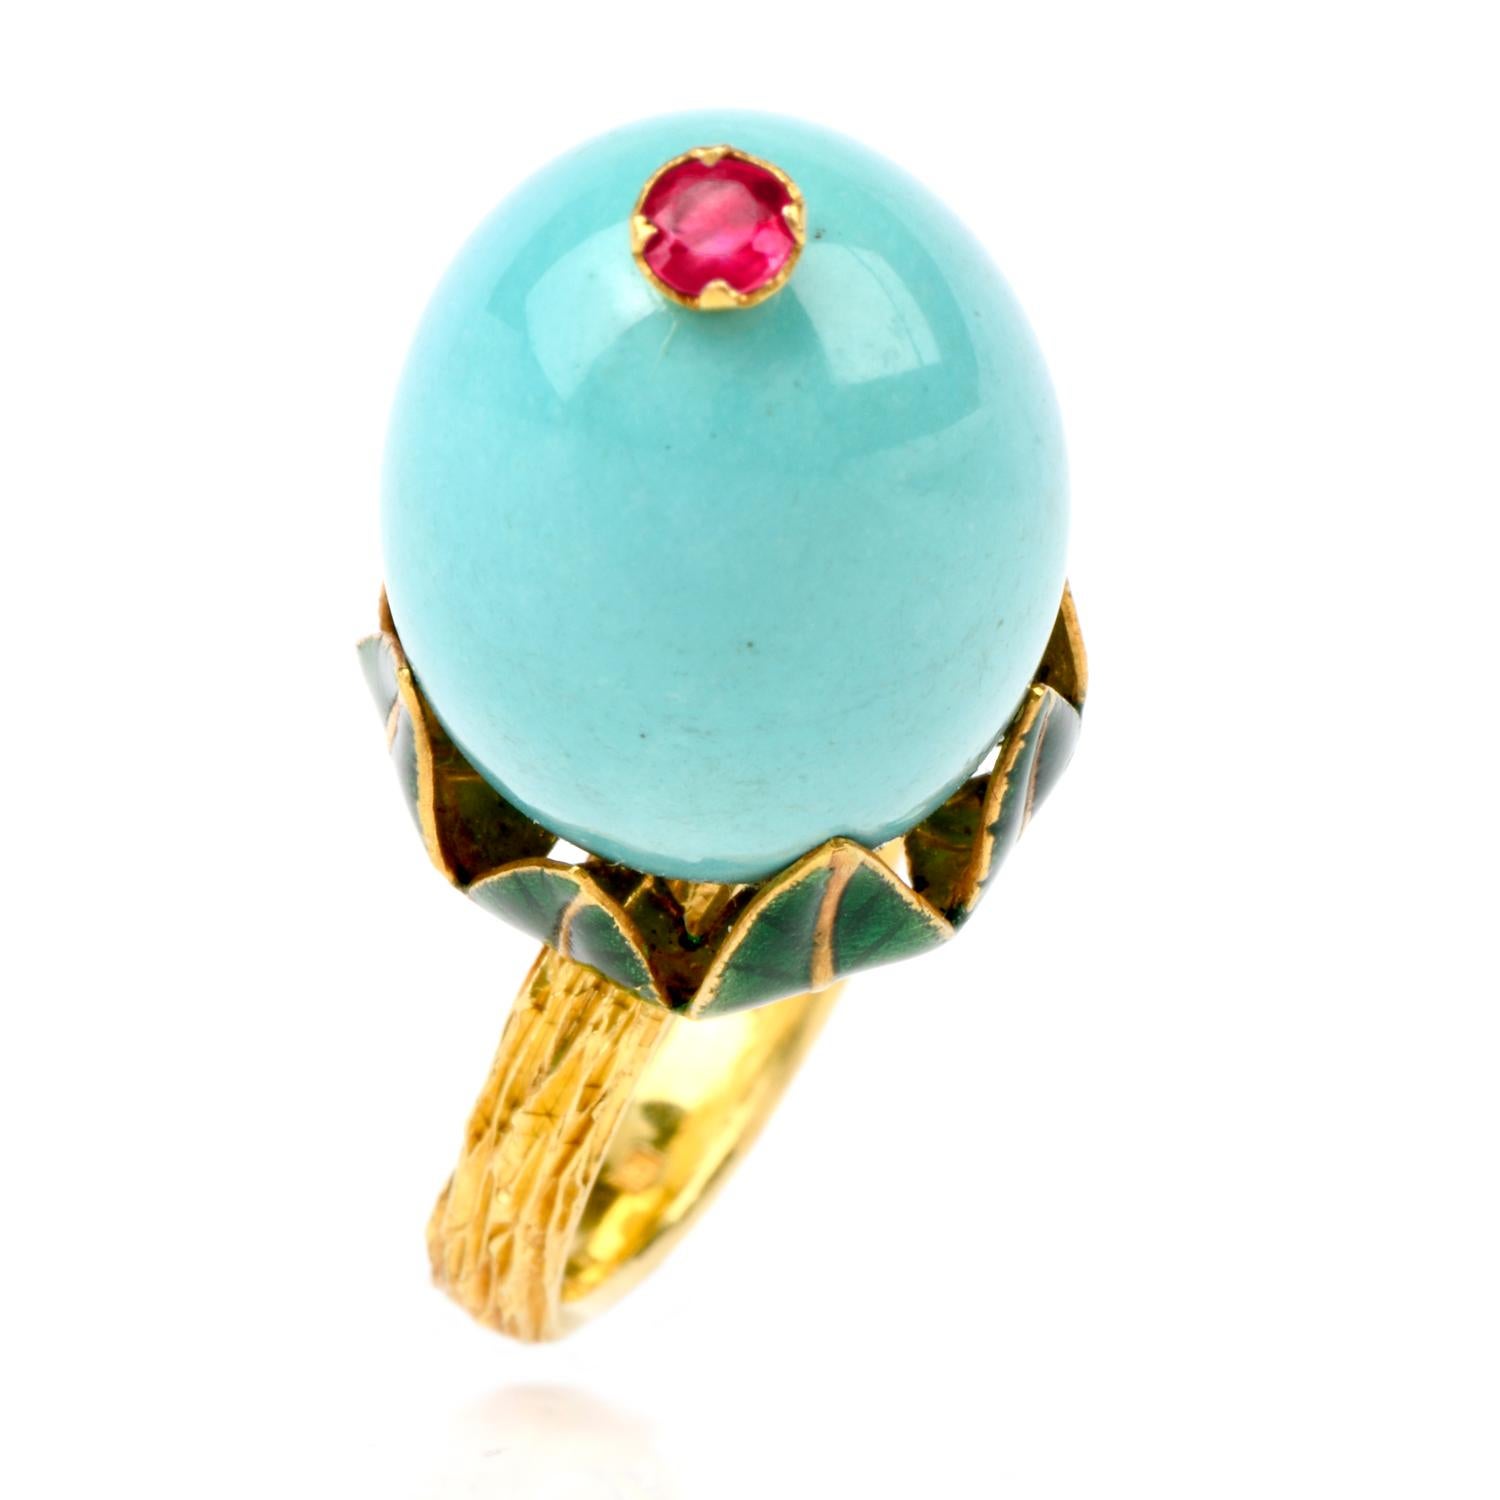 This exotic, vintage, 18K yellow gold ring will

Set the stage for any safari or nature attire.  From the

Bark finish of the band to the hand enameled, vibrant

Green leaves, this astonishing work of art boasts of

Natures beauty.  

Nestled in the